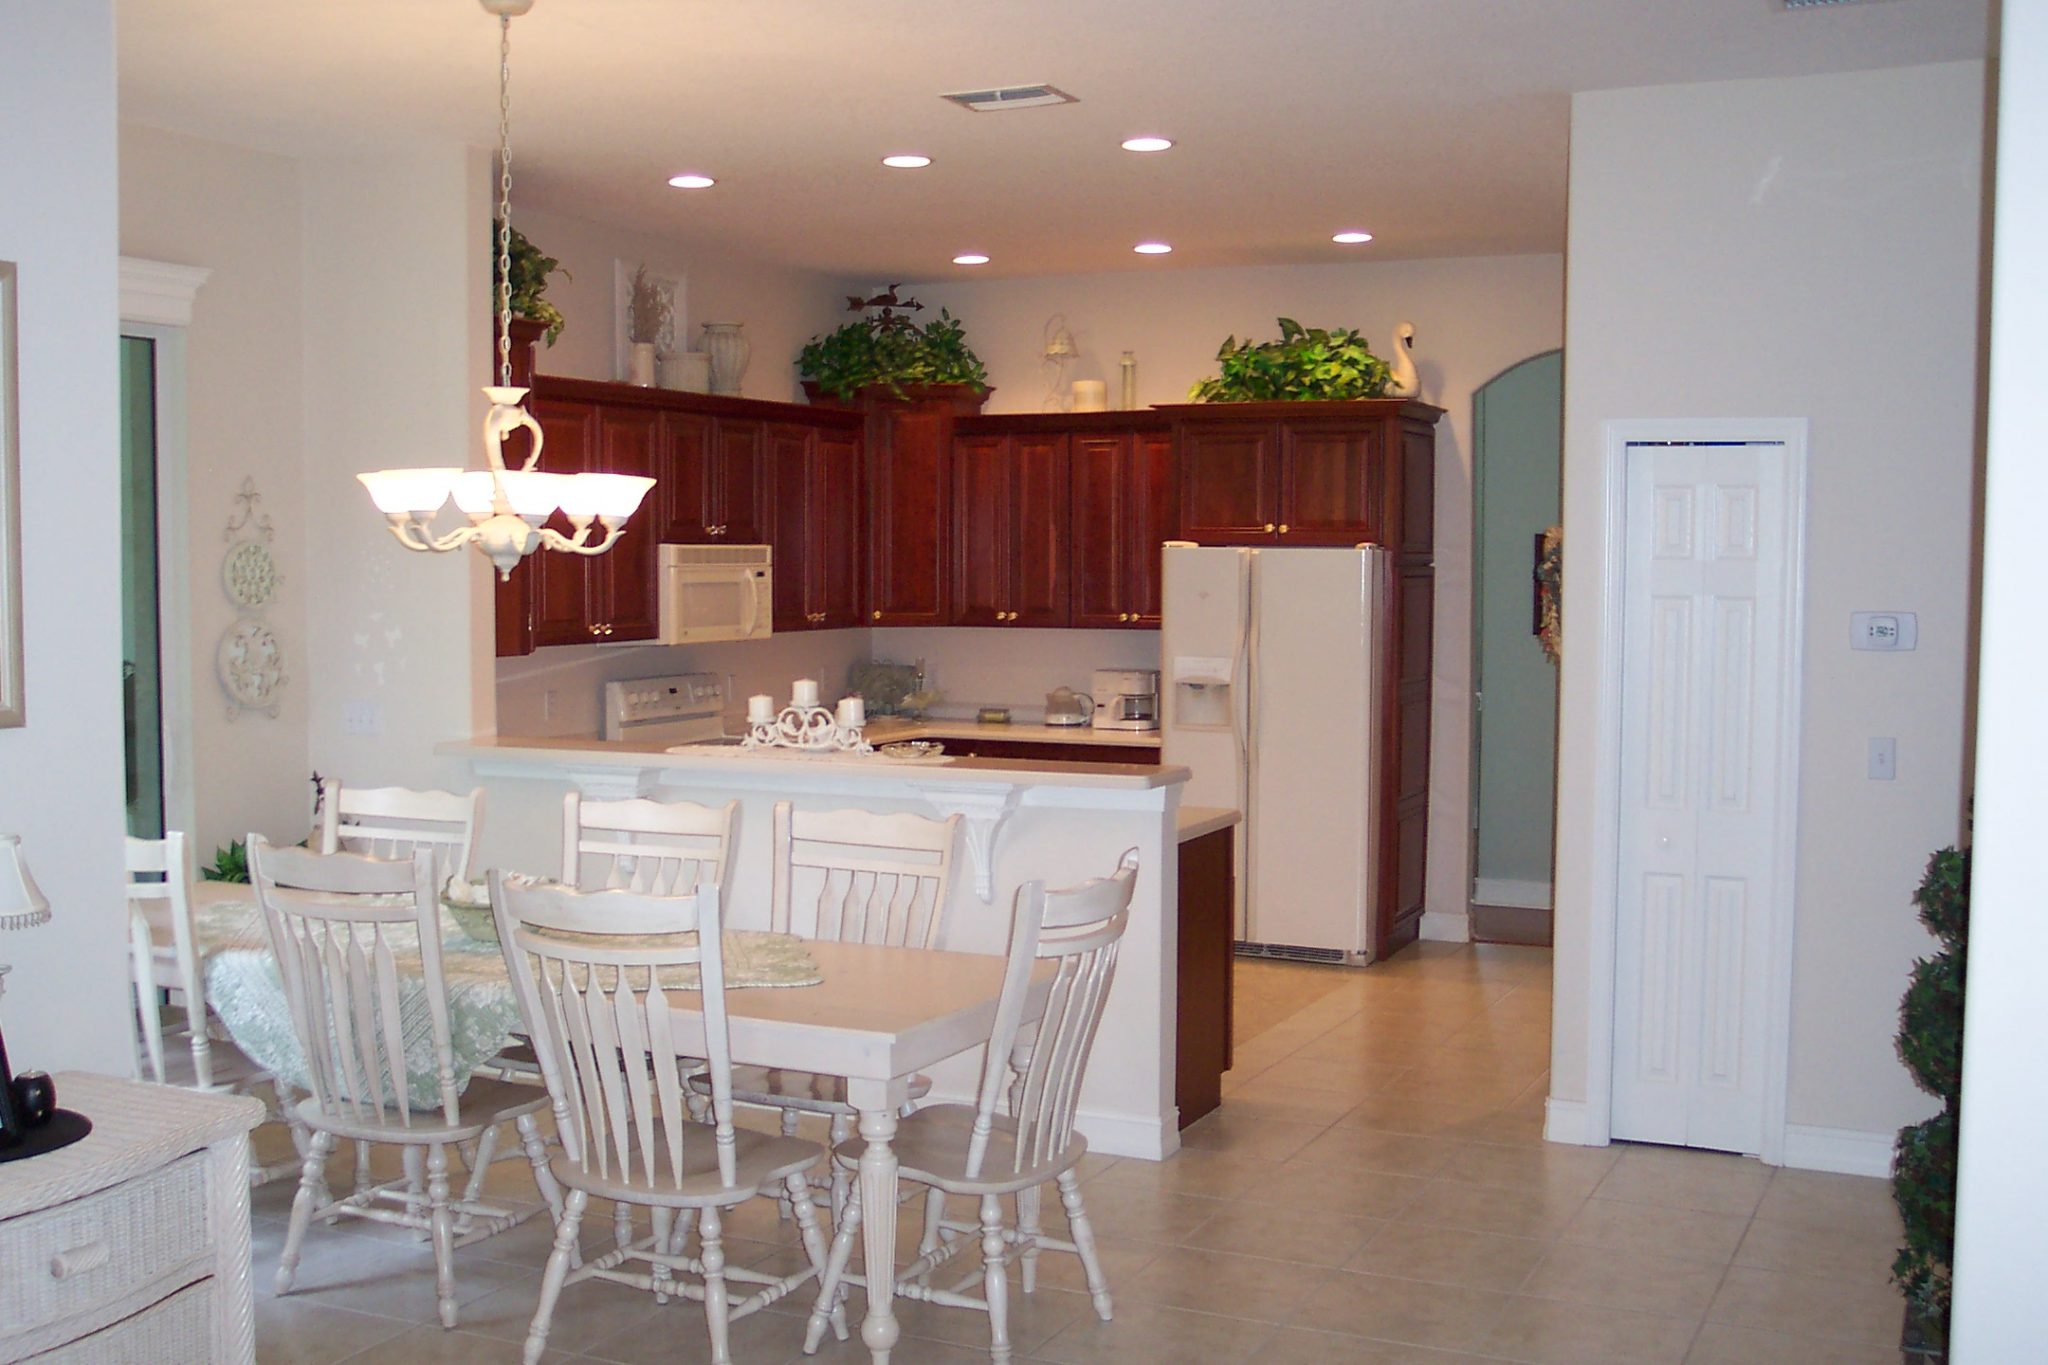 View of the Windsor main kitchen with breakfast nook in front.  The Windsor can offer up to 5 bedrooms for one family if desired.